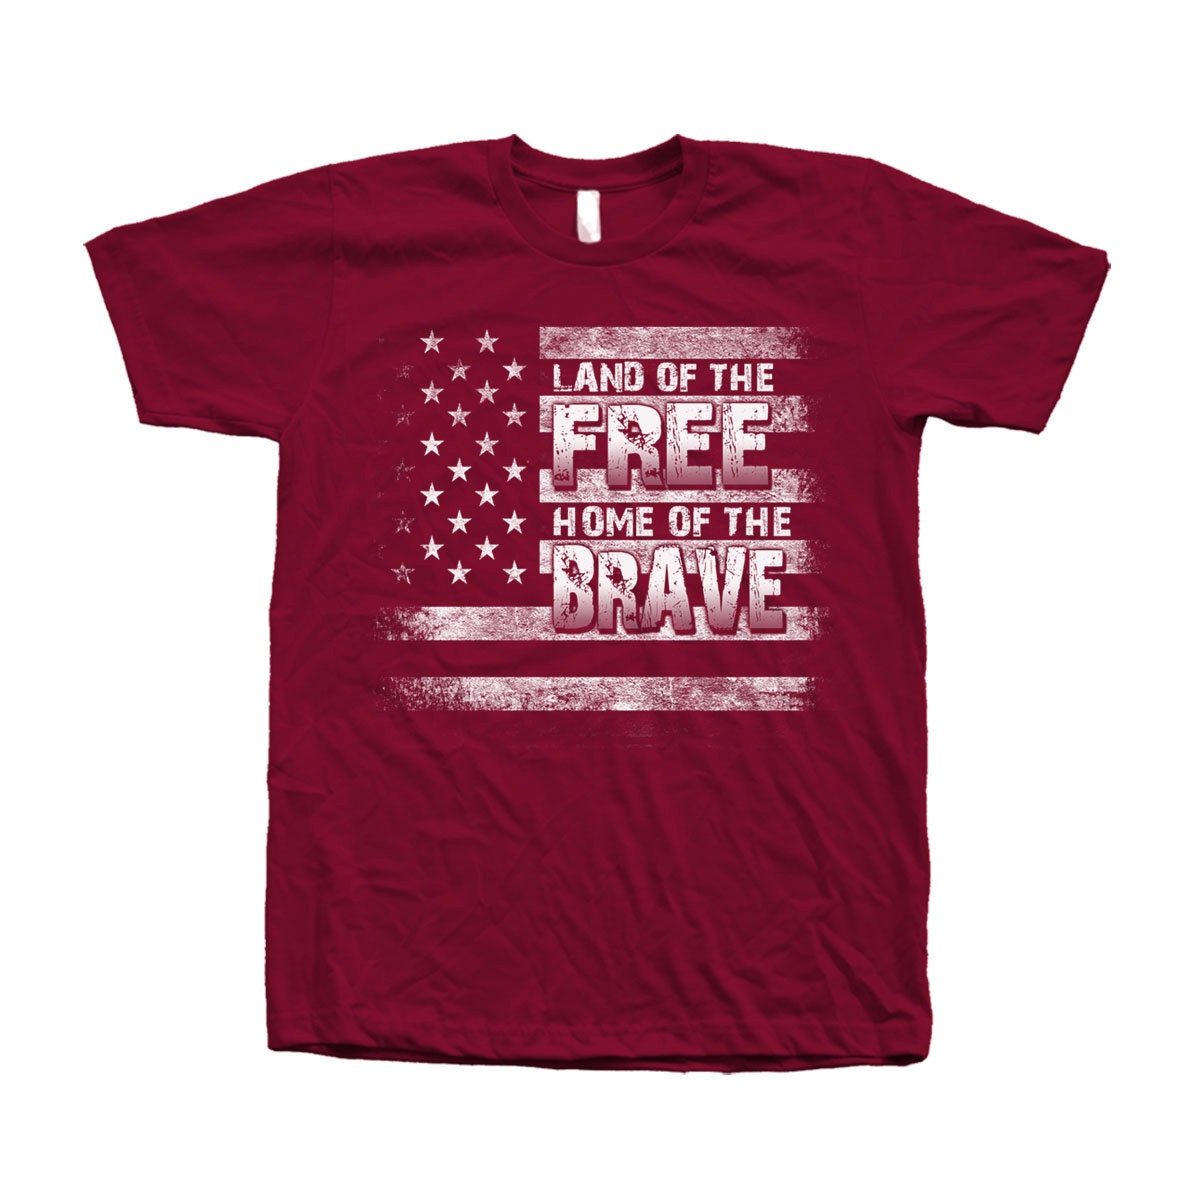 Land Of The Free Home Brave T Shirt Hand Screen Printed On American Apparel Crew Neck